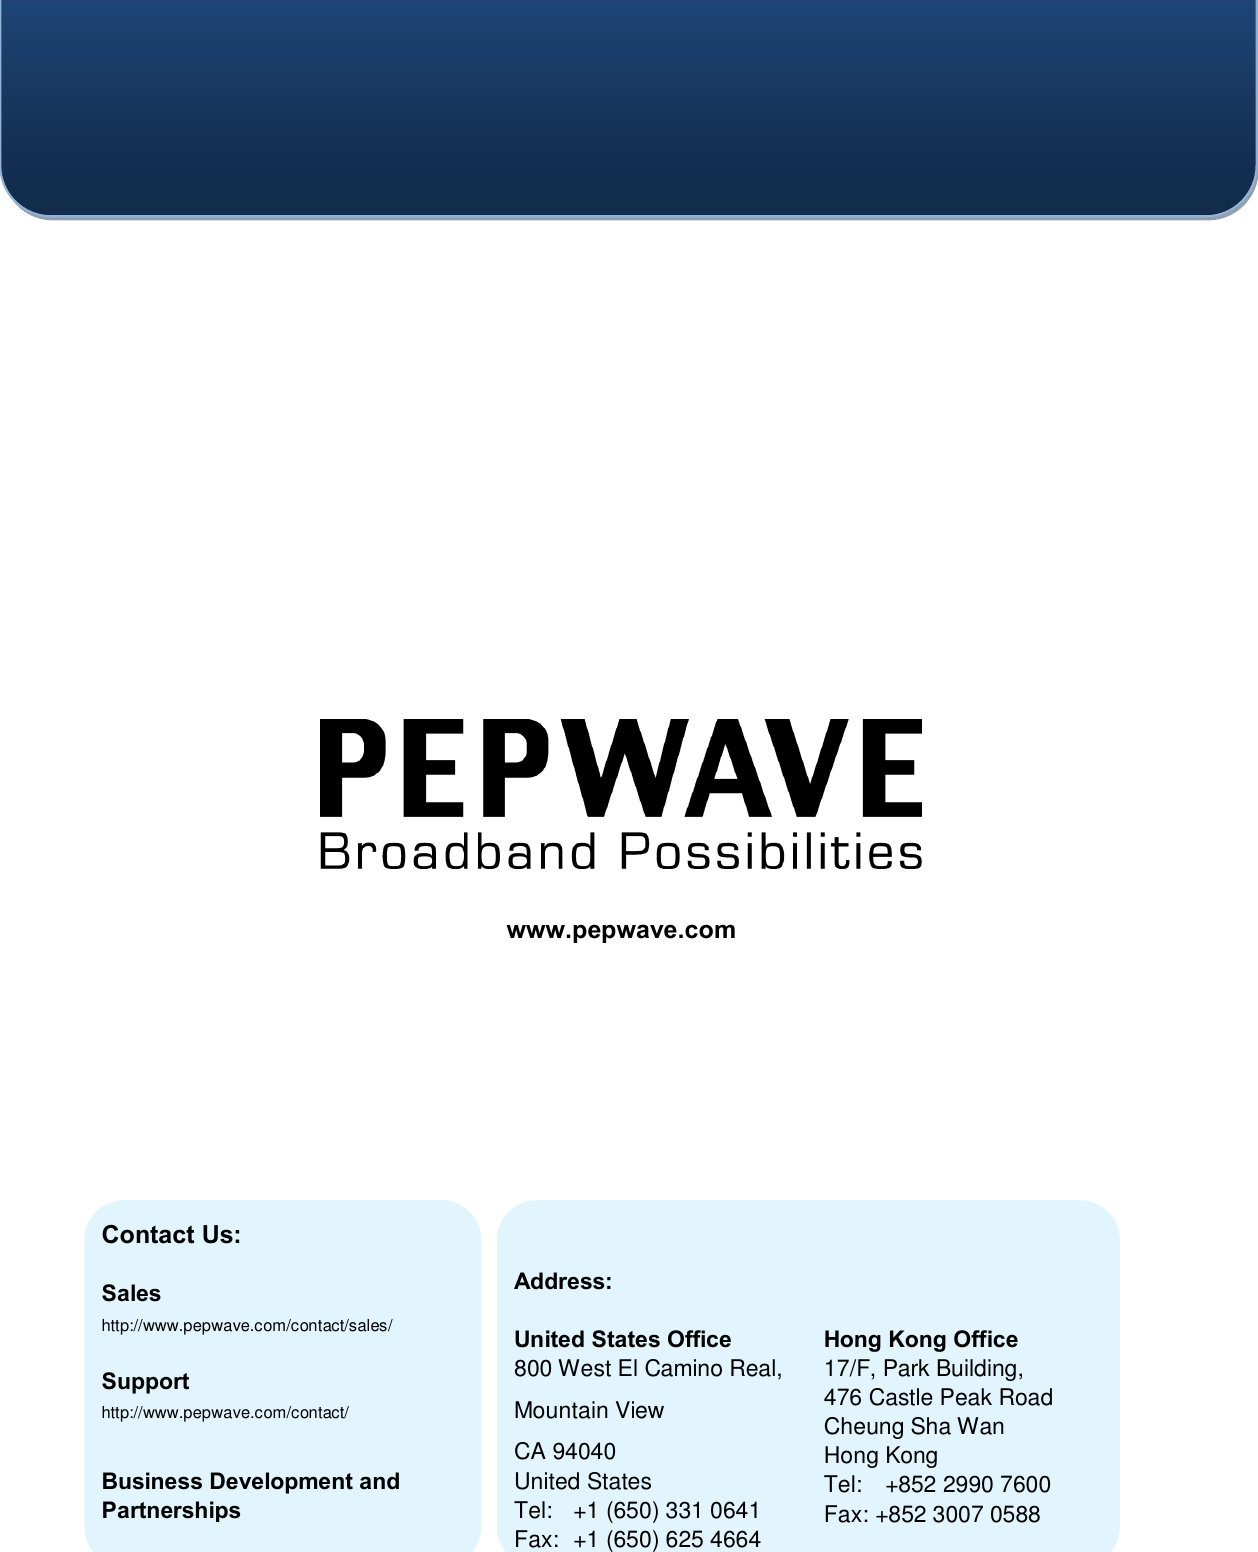         Contact Us:    Sales http://www.pepwave.com/contact/sales/  Support http://www.pepwave.com/contact/    Business Development and Partnerships http://www.pepwave.com/partners/channel-partner-program/ Address:  United States Office 800 West El Camino Real, Mountain View CA 94040 United States Tel:  +1 (650) 331 0641 Fax:  +1 (650) 625 4664   Hong Kong Office 17/F, Park Building,   476 Castle Peak Road Cheung Sha Wan Hong Kong Tel:    +852 2990 7600 Fax: +852 3007 0588  www.pepwave.com  